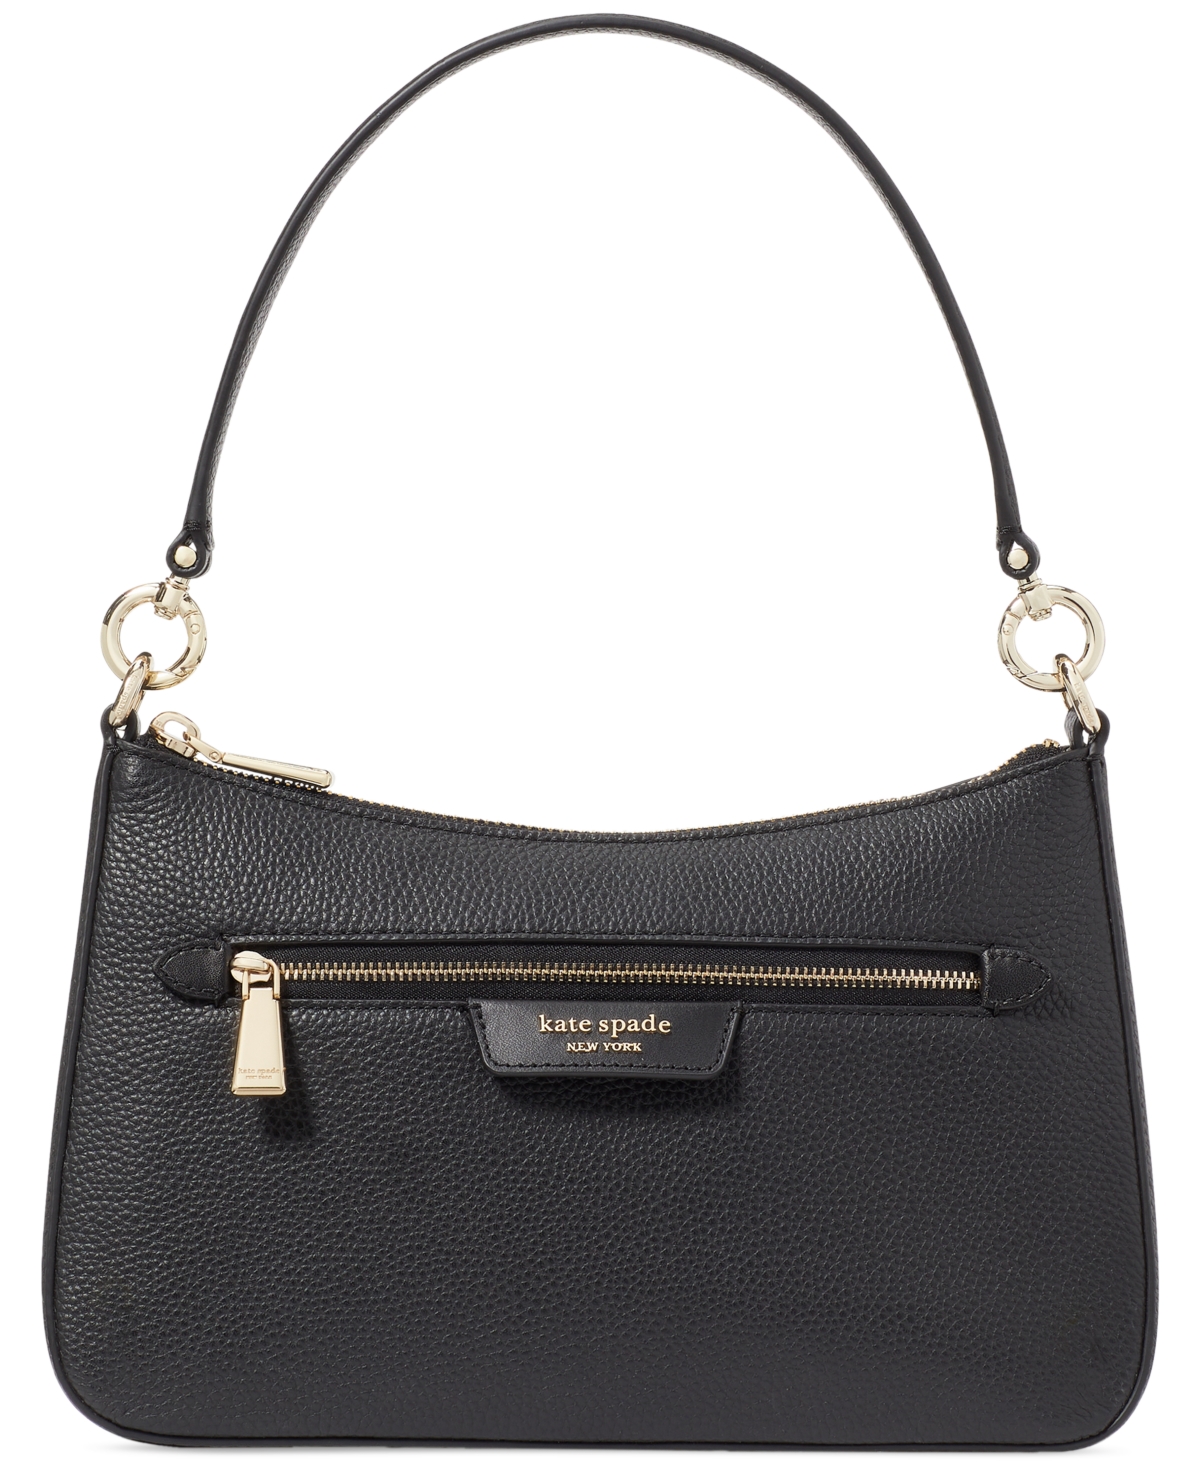 KATE SPADE HUDSON PEBBLED LEATHER SMALL CONVERTIBLE CROSSBODY